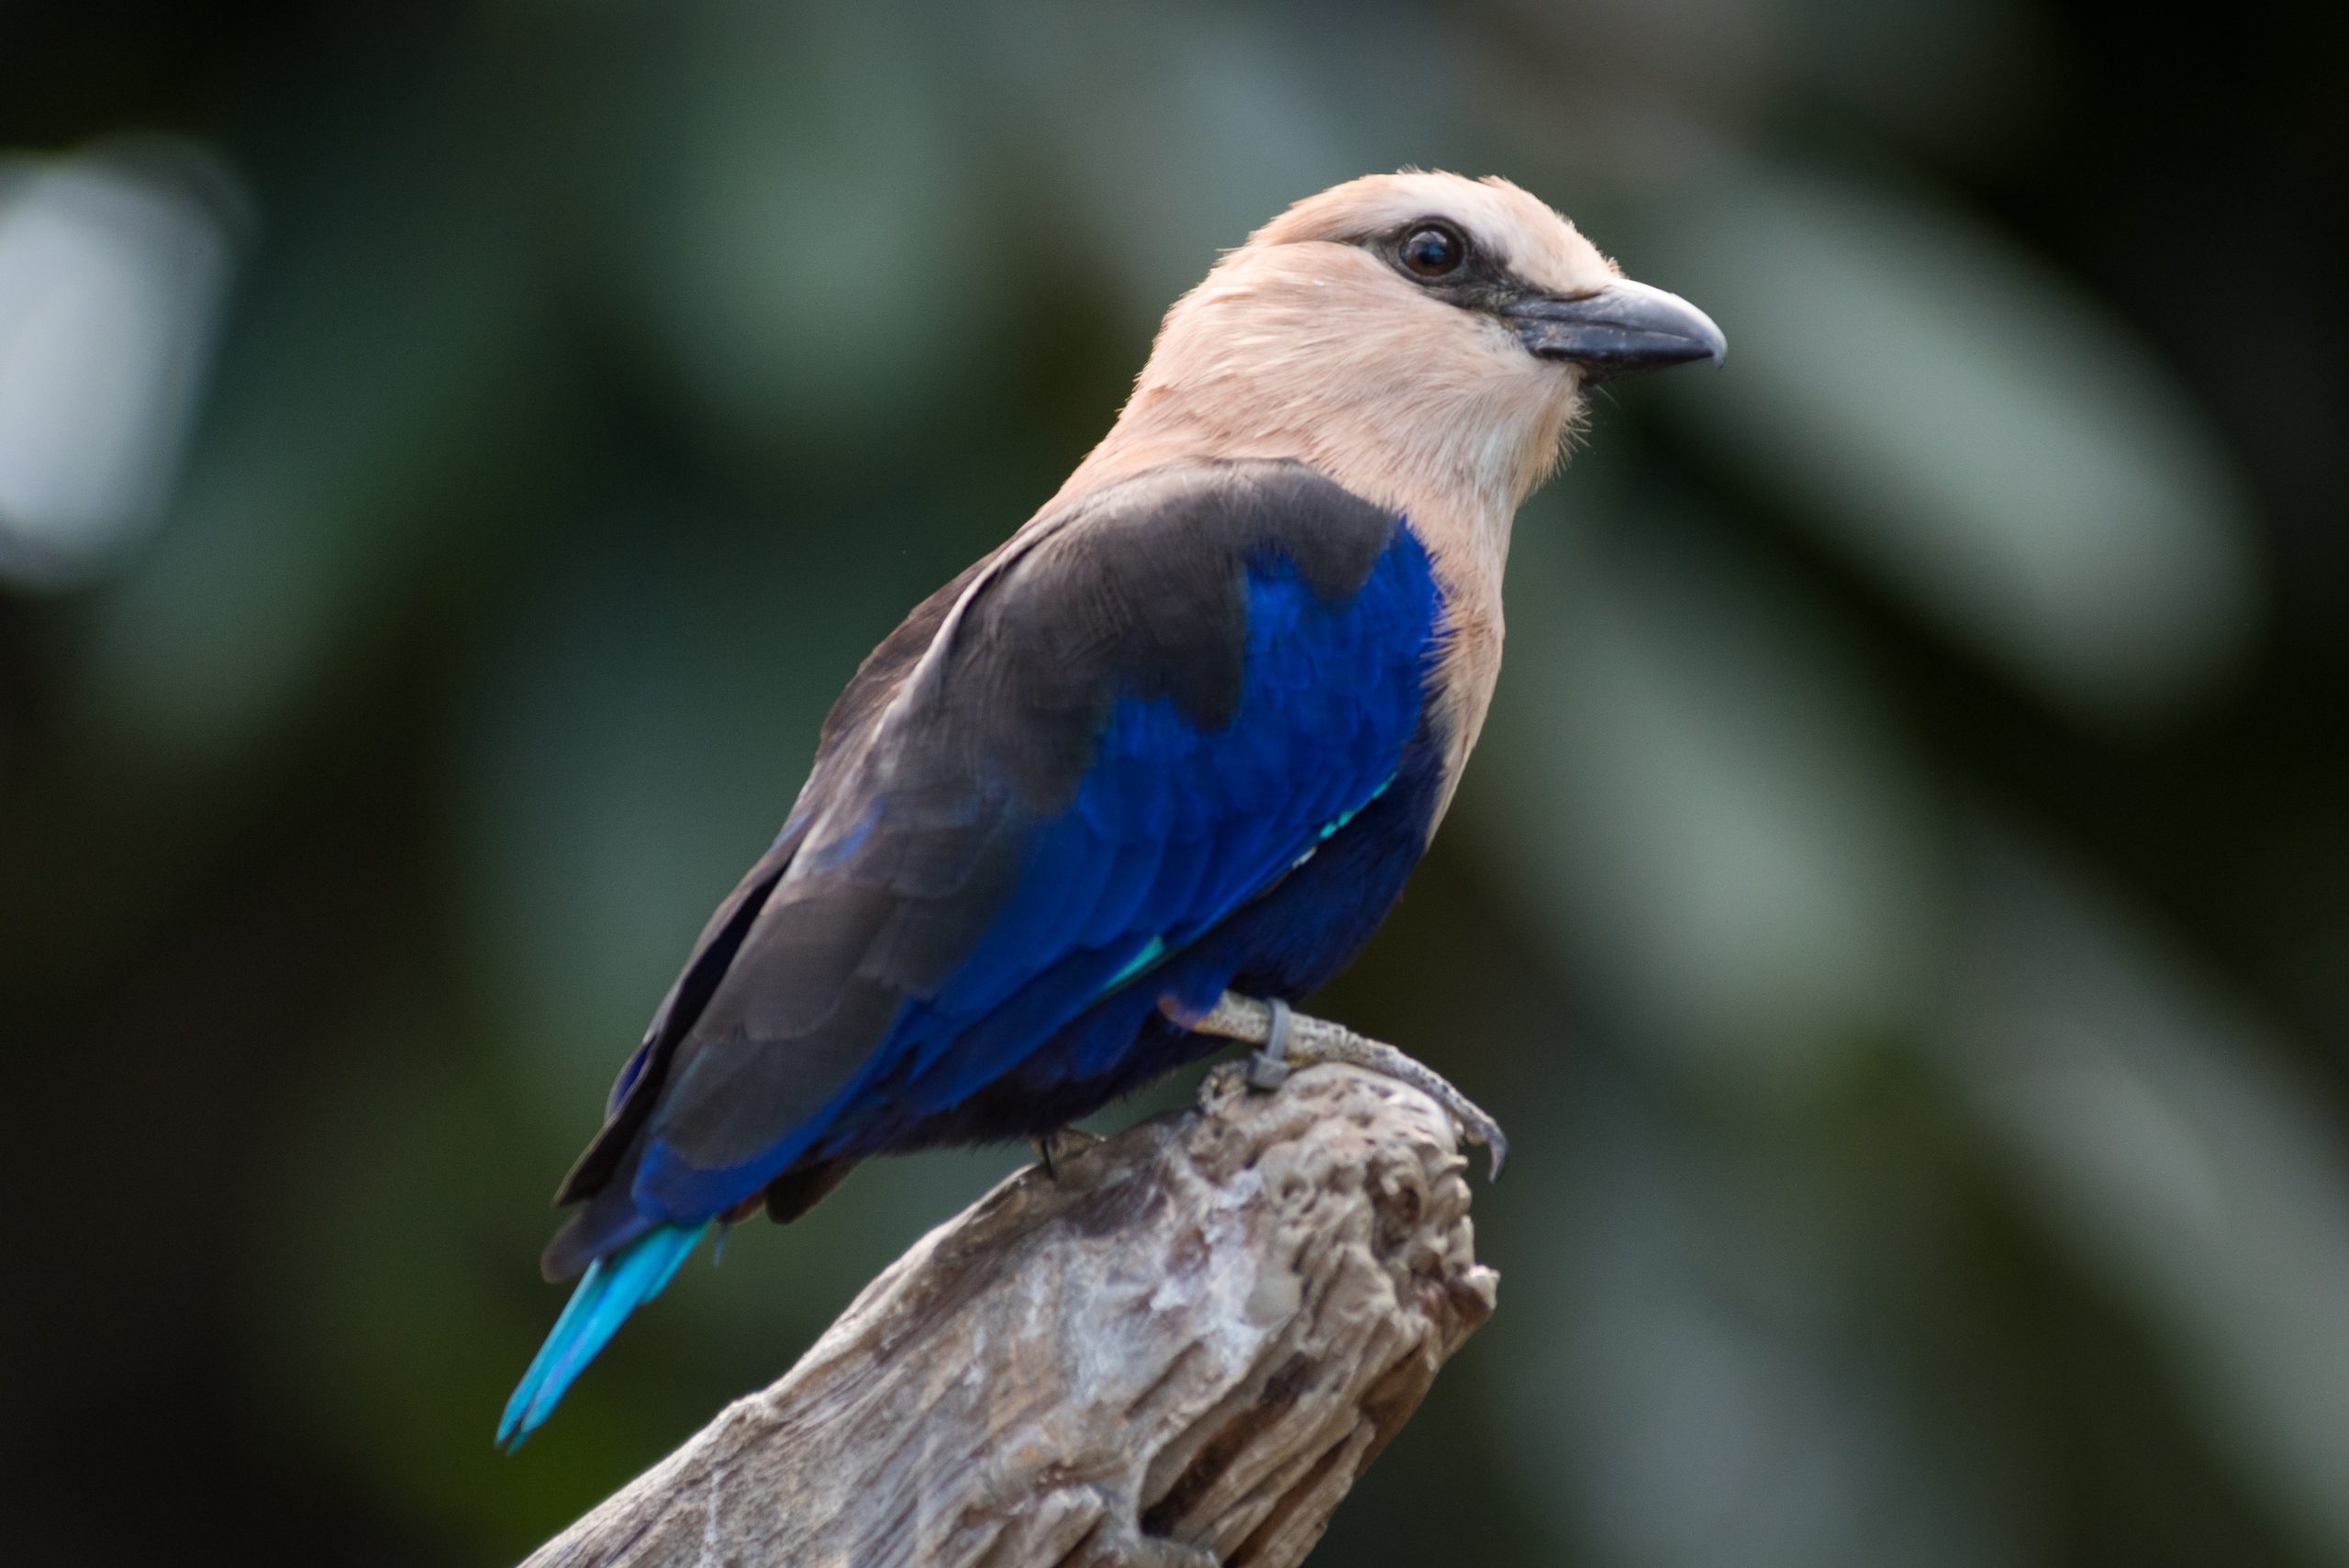 A Blue-bellied Roller perched on a branch